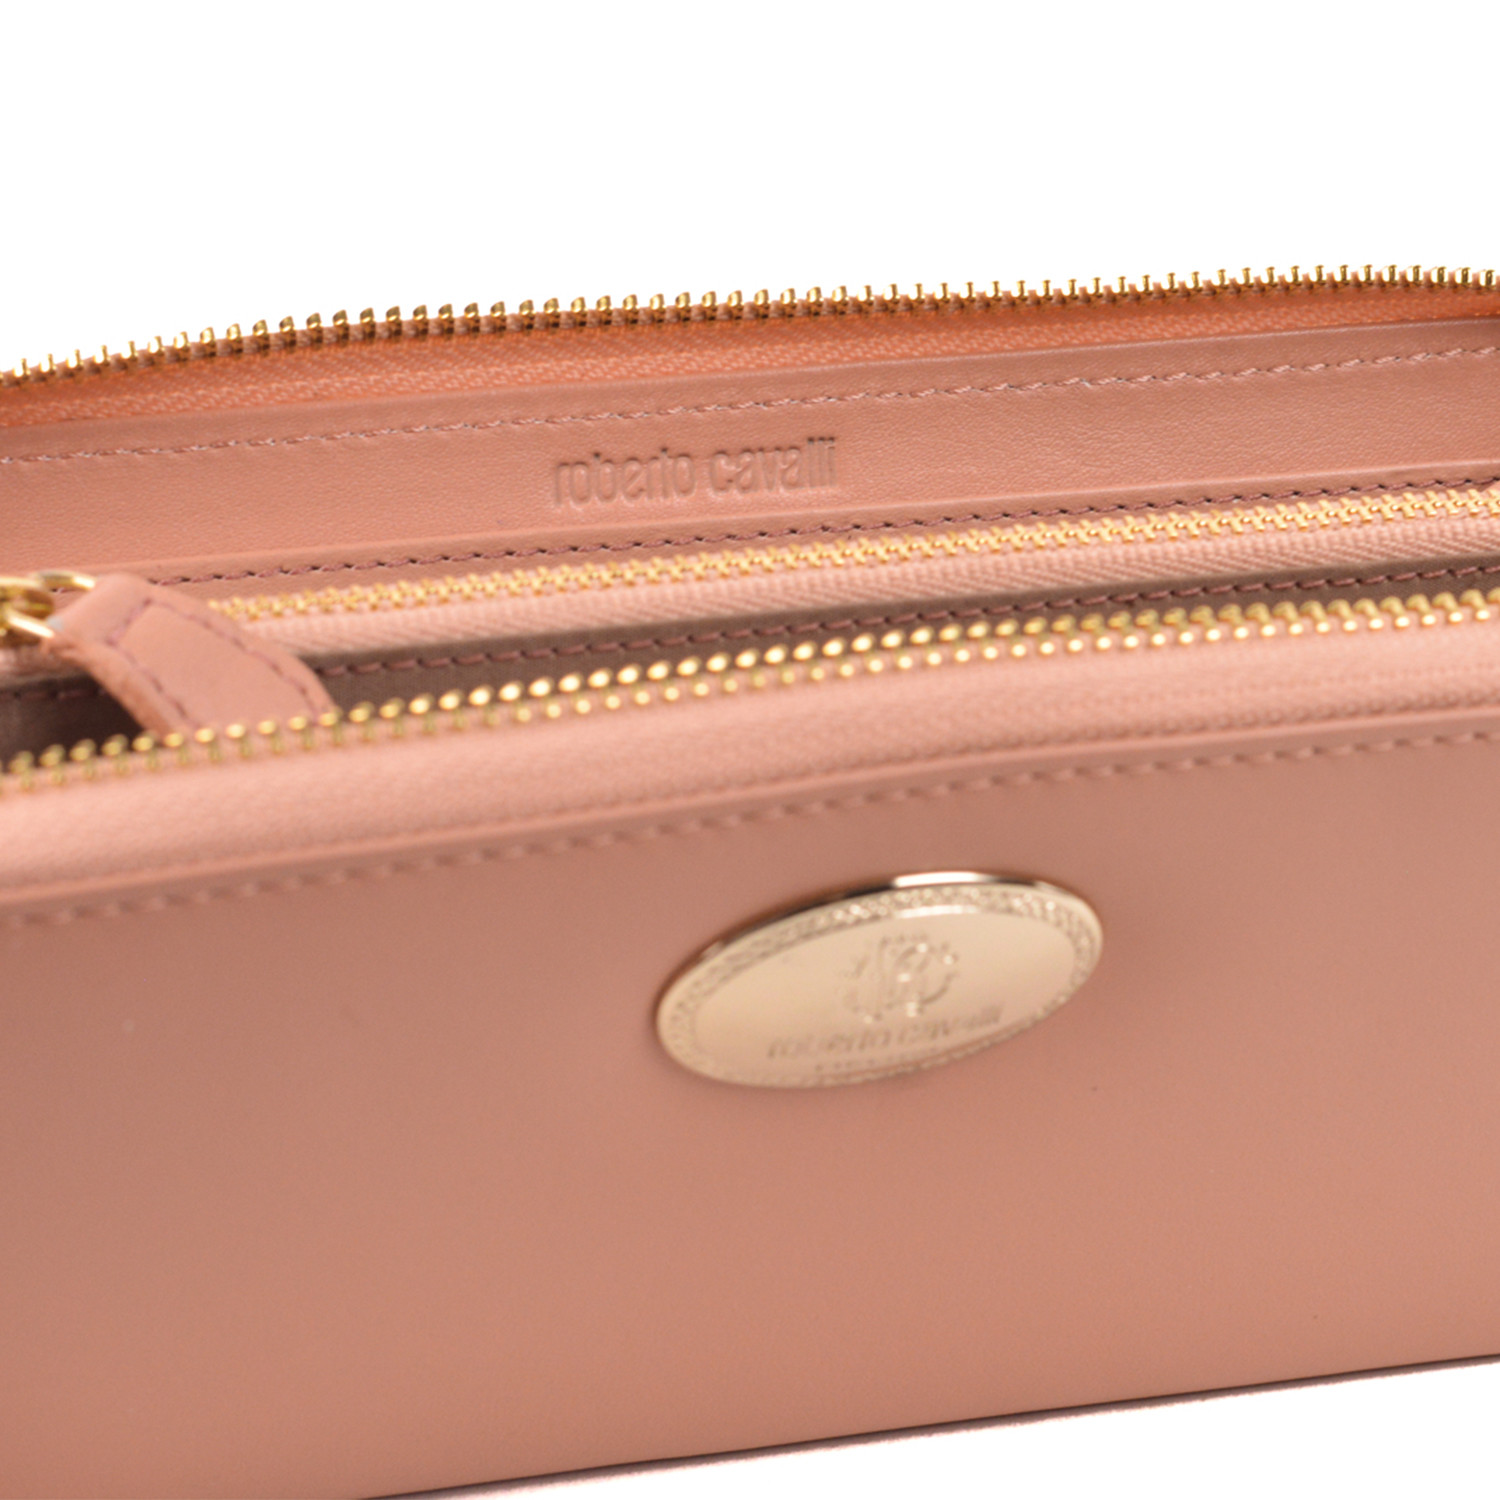 Continental Leather Wallet // Pink - Roberto Cavalli - Touch of Modern